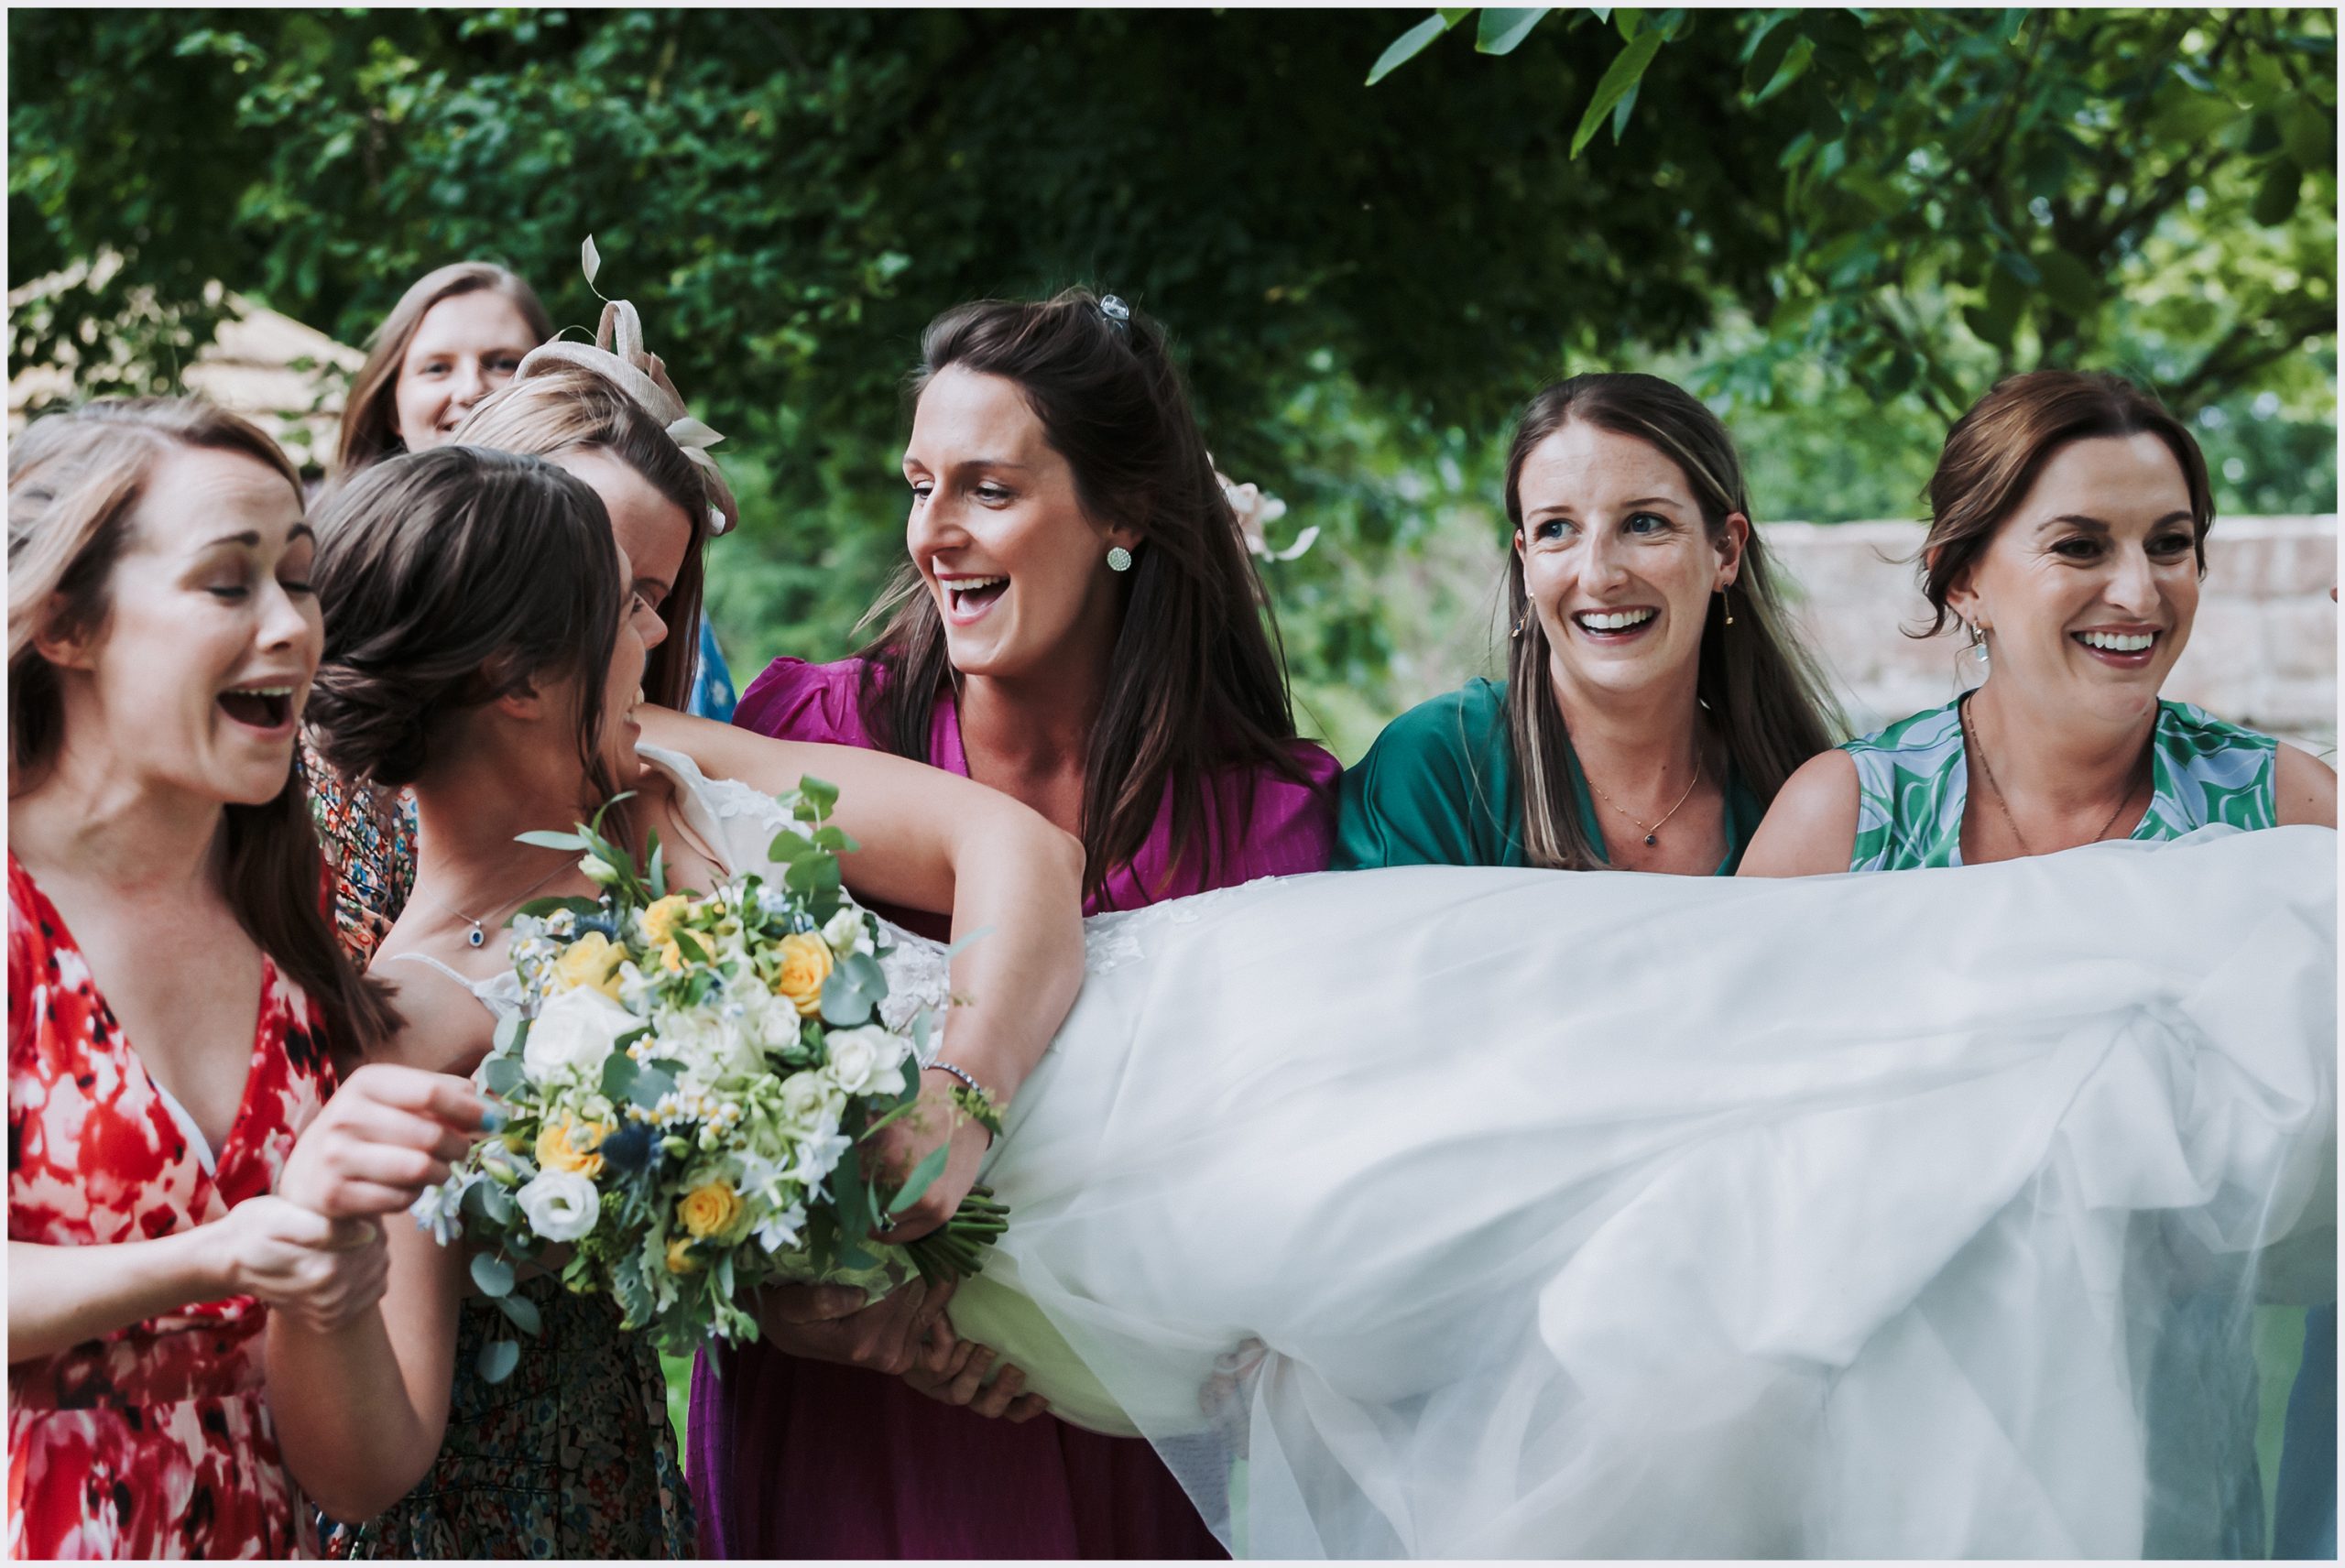 A bride laughs hysterically as she is carried by her friends during her wedding reception in the gorgeous grounds of The Grosvenor Pulford Hotel and Spa.  Image captured by Grosvenor Pulford wedding photographer Helena Jayne Photography